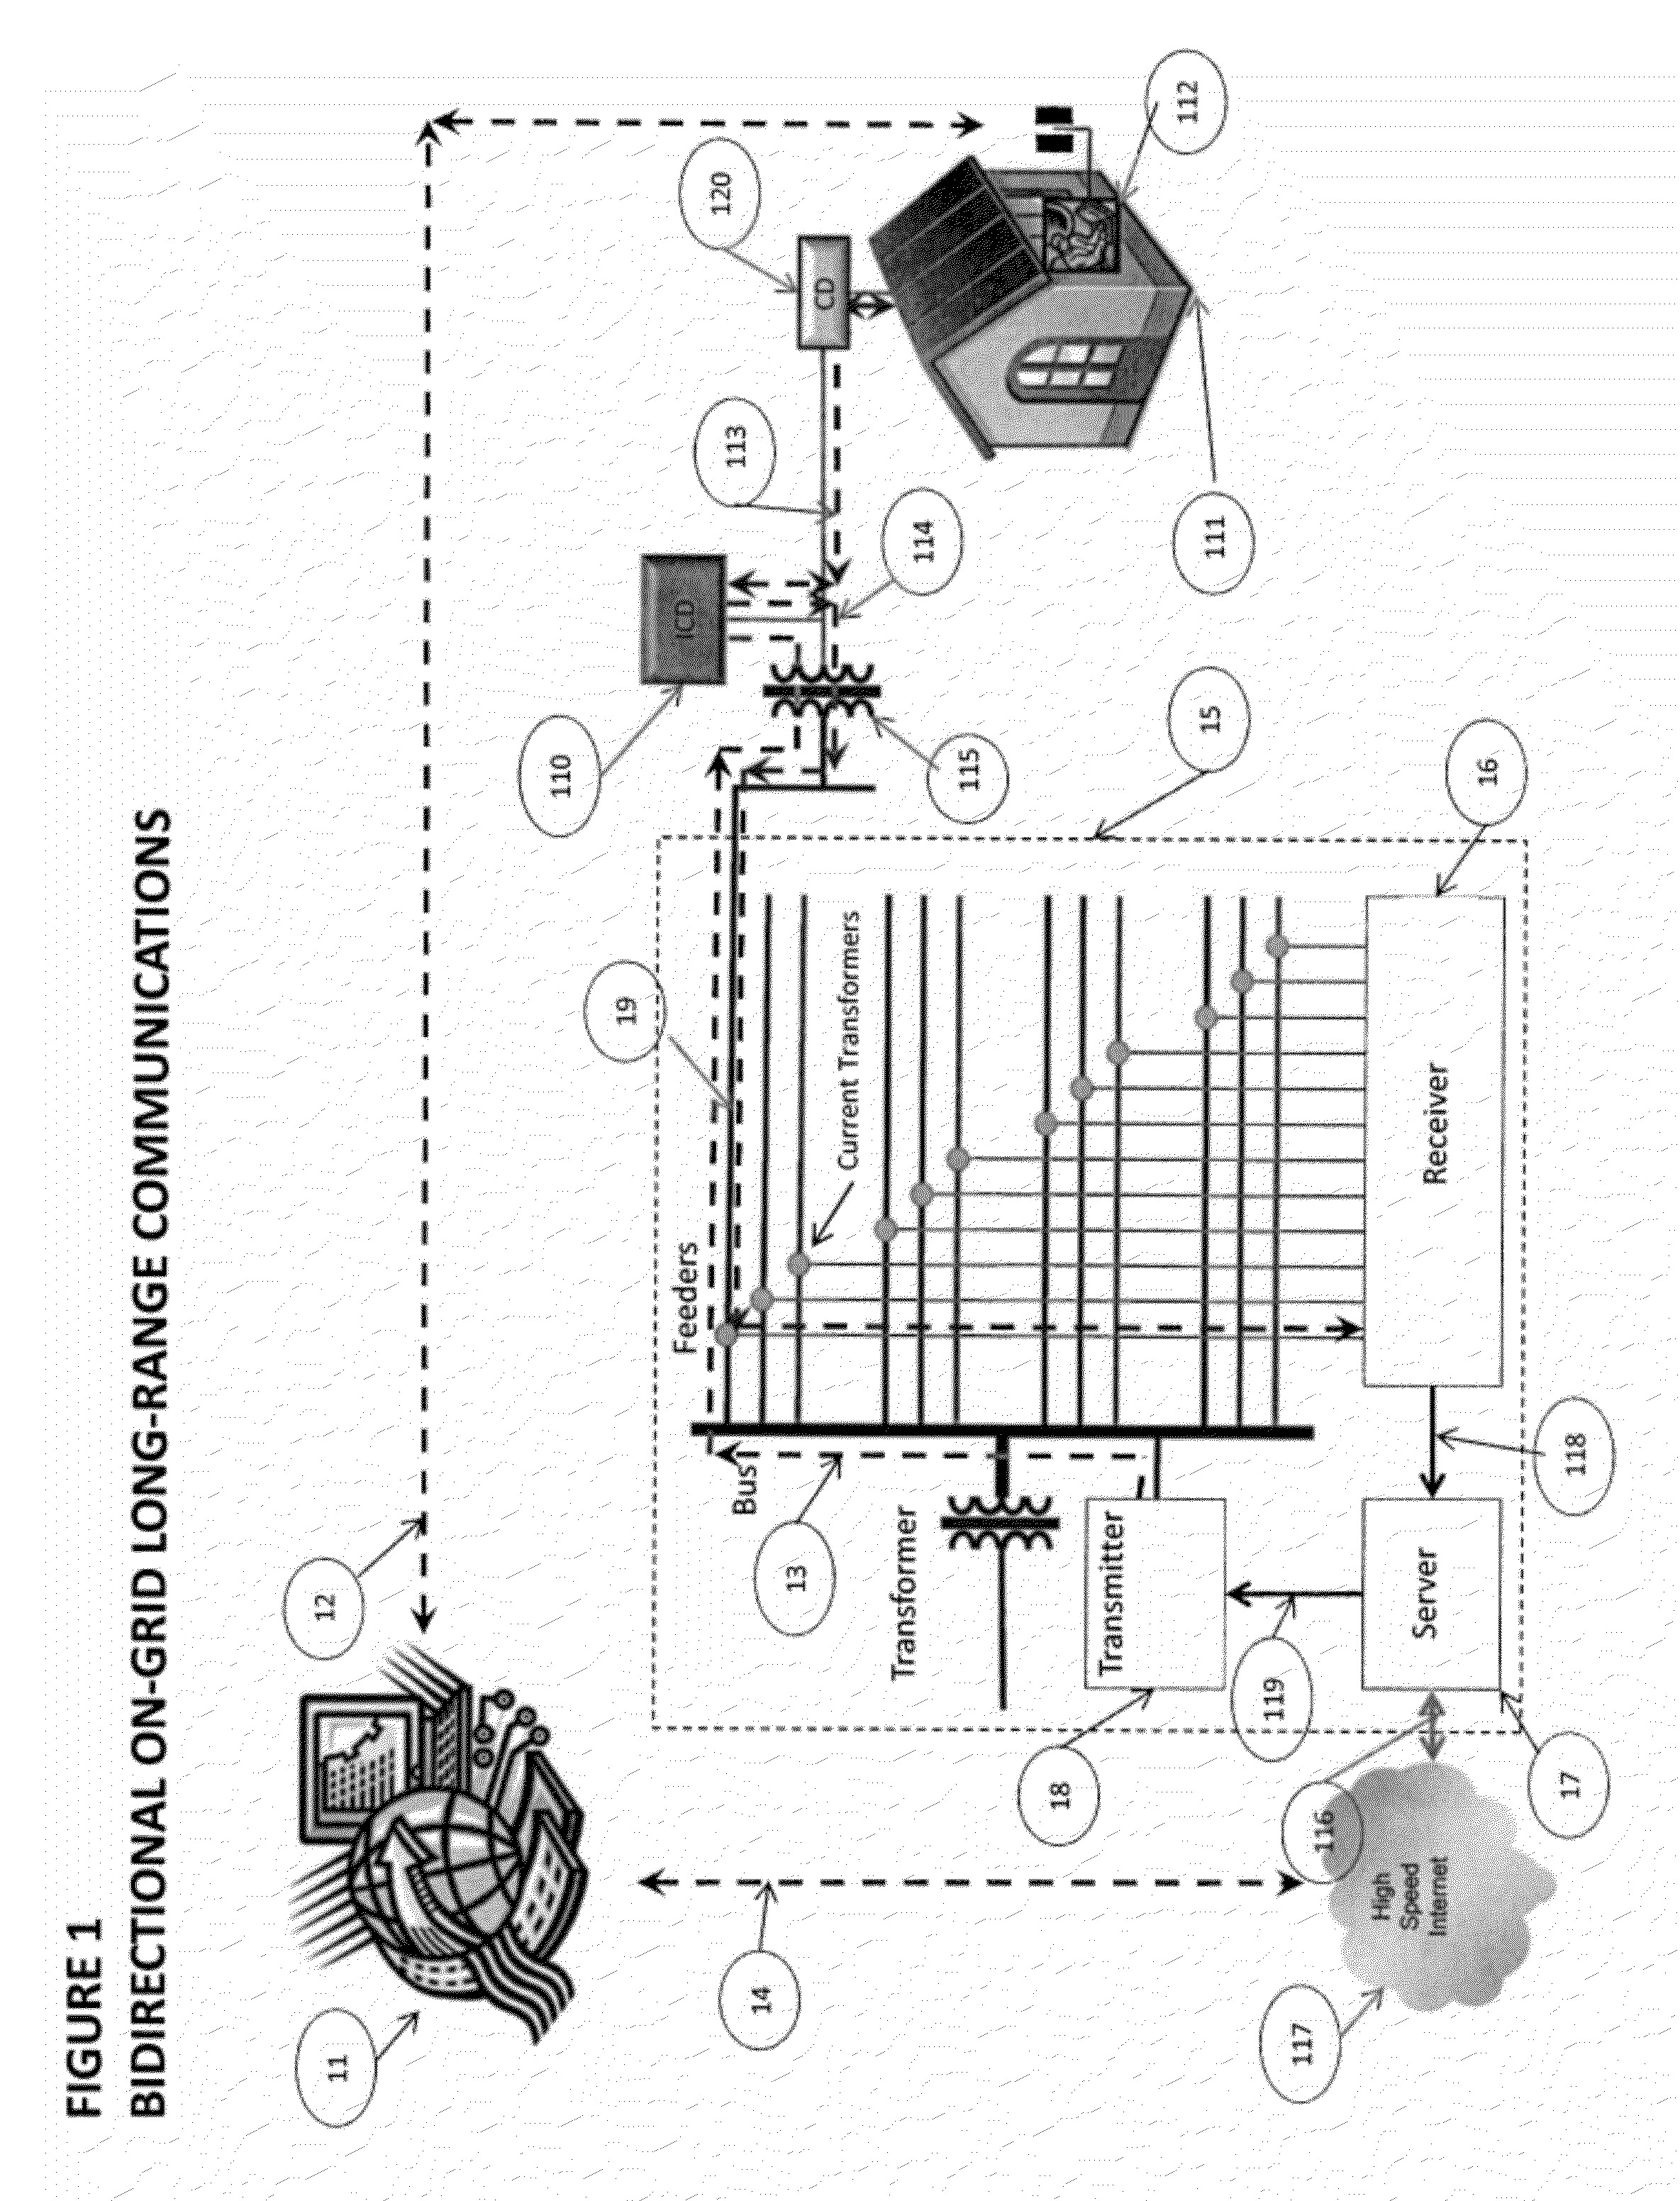 System and method for grid based cyber security